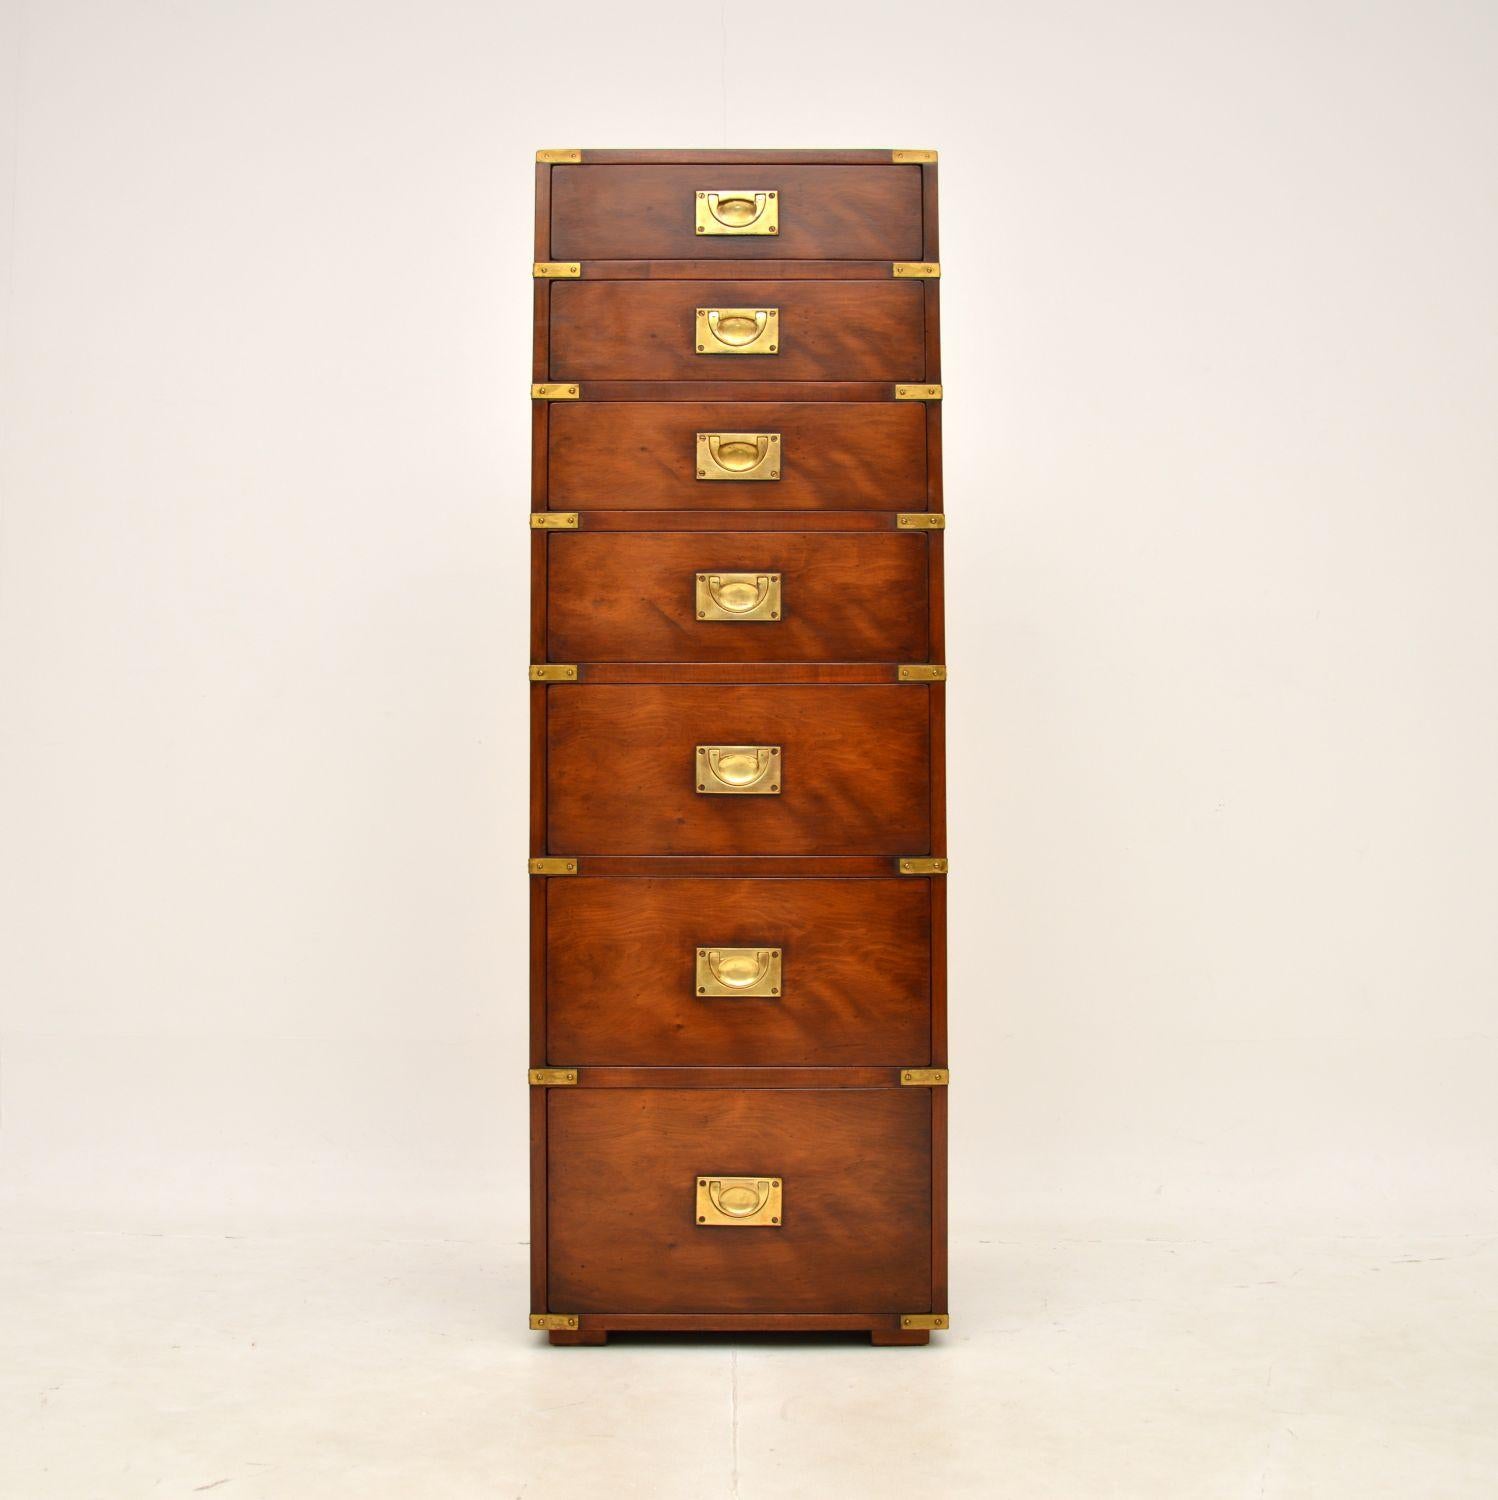 A superb antique yew wood military campaign chest of drawers. This was made by Kennedy furniture and was retailed in Harrods, it dates from around the 1960-70’s.

It is of exceptional quality, it is very heavy with solid oak construction and